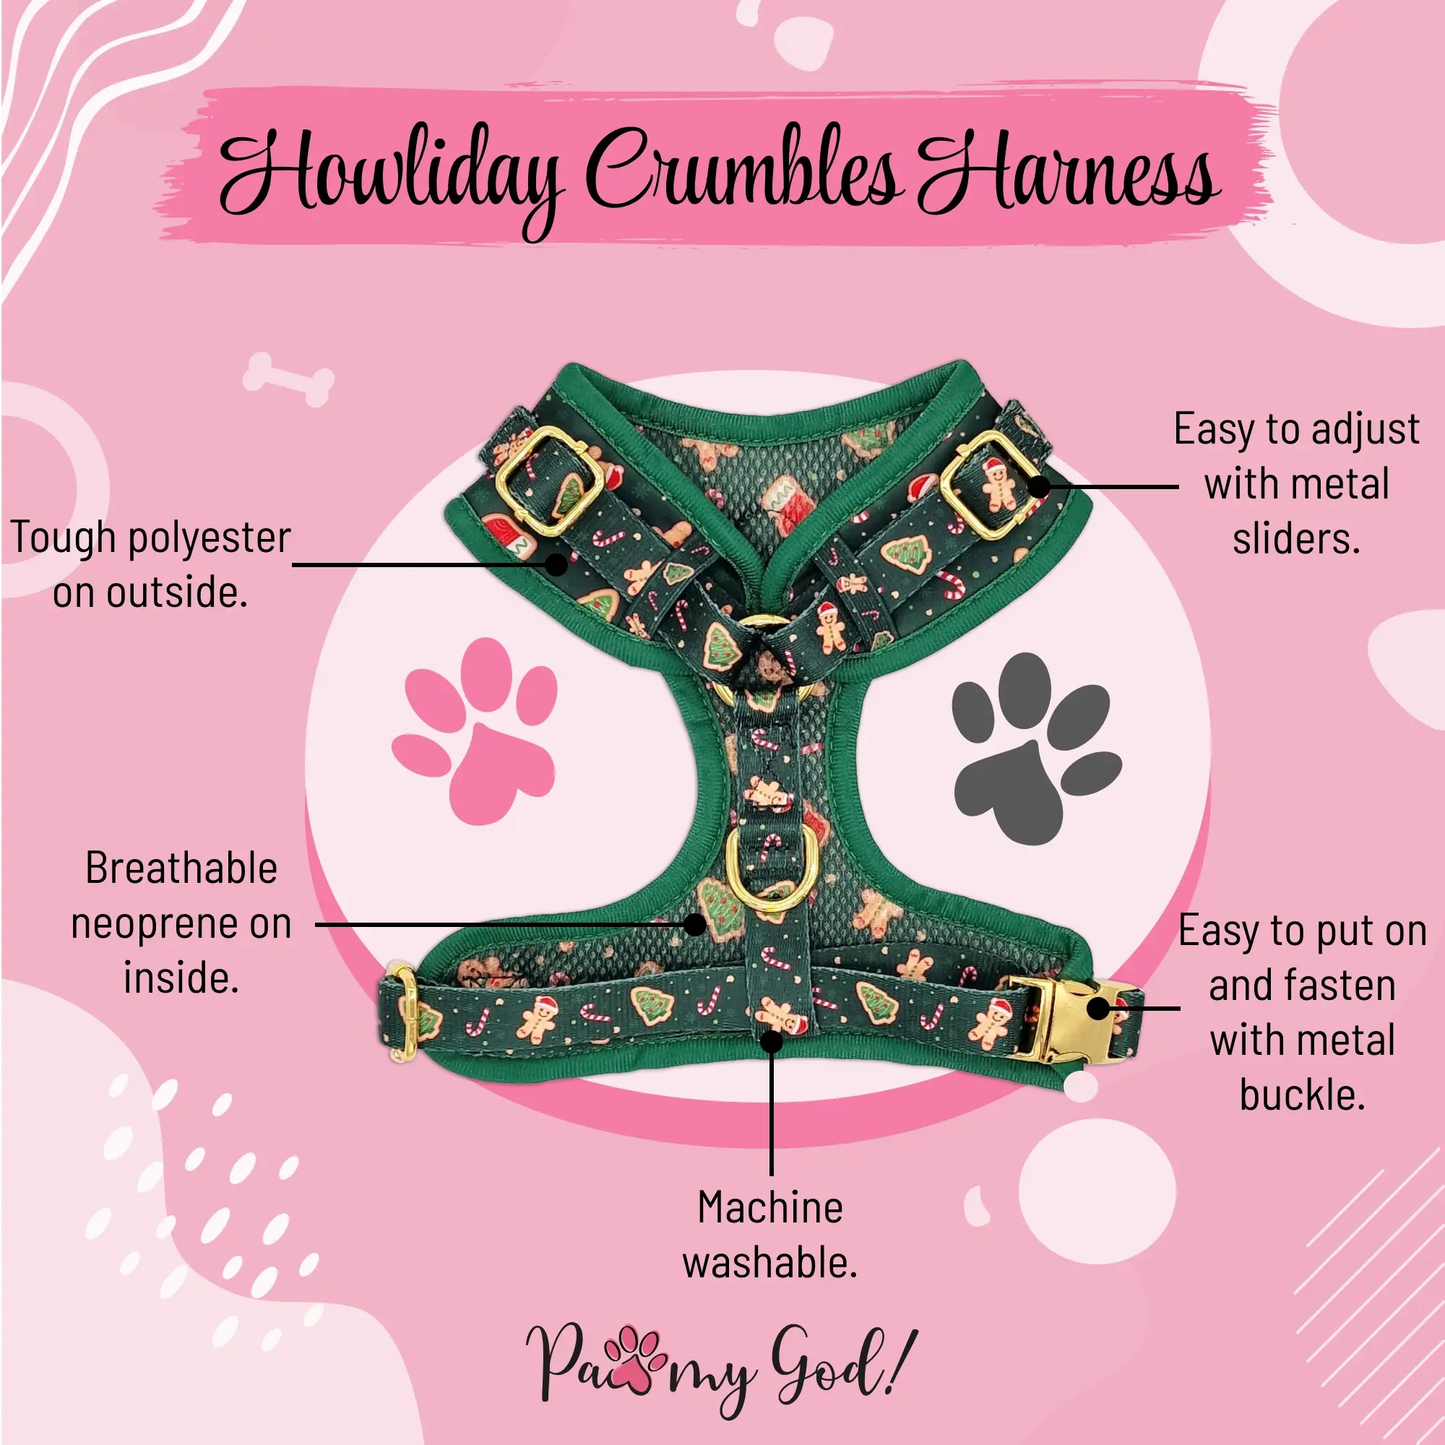 Howliday Crumbles Harness Features